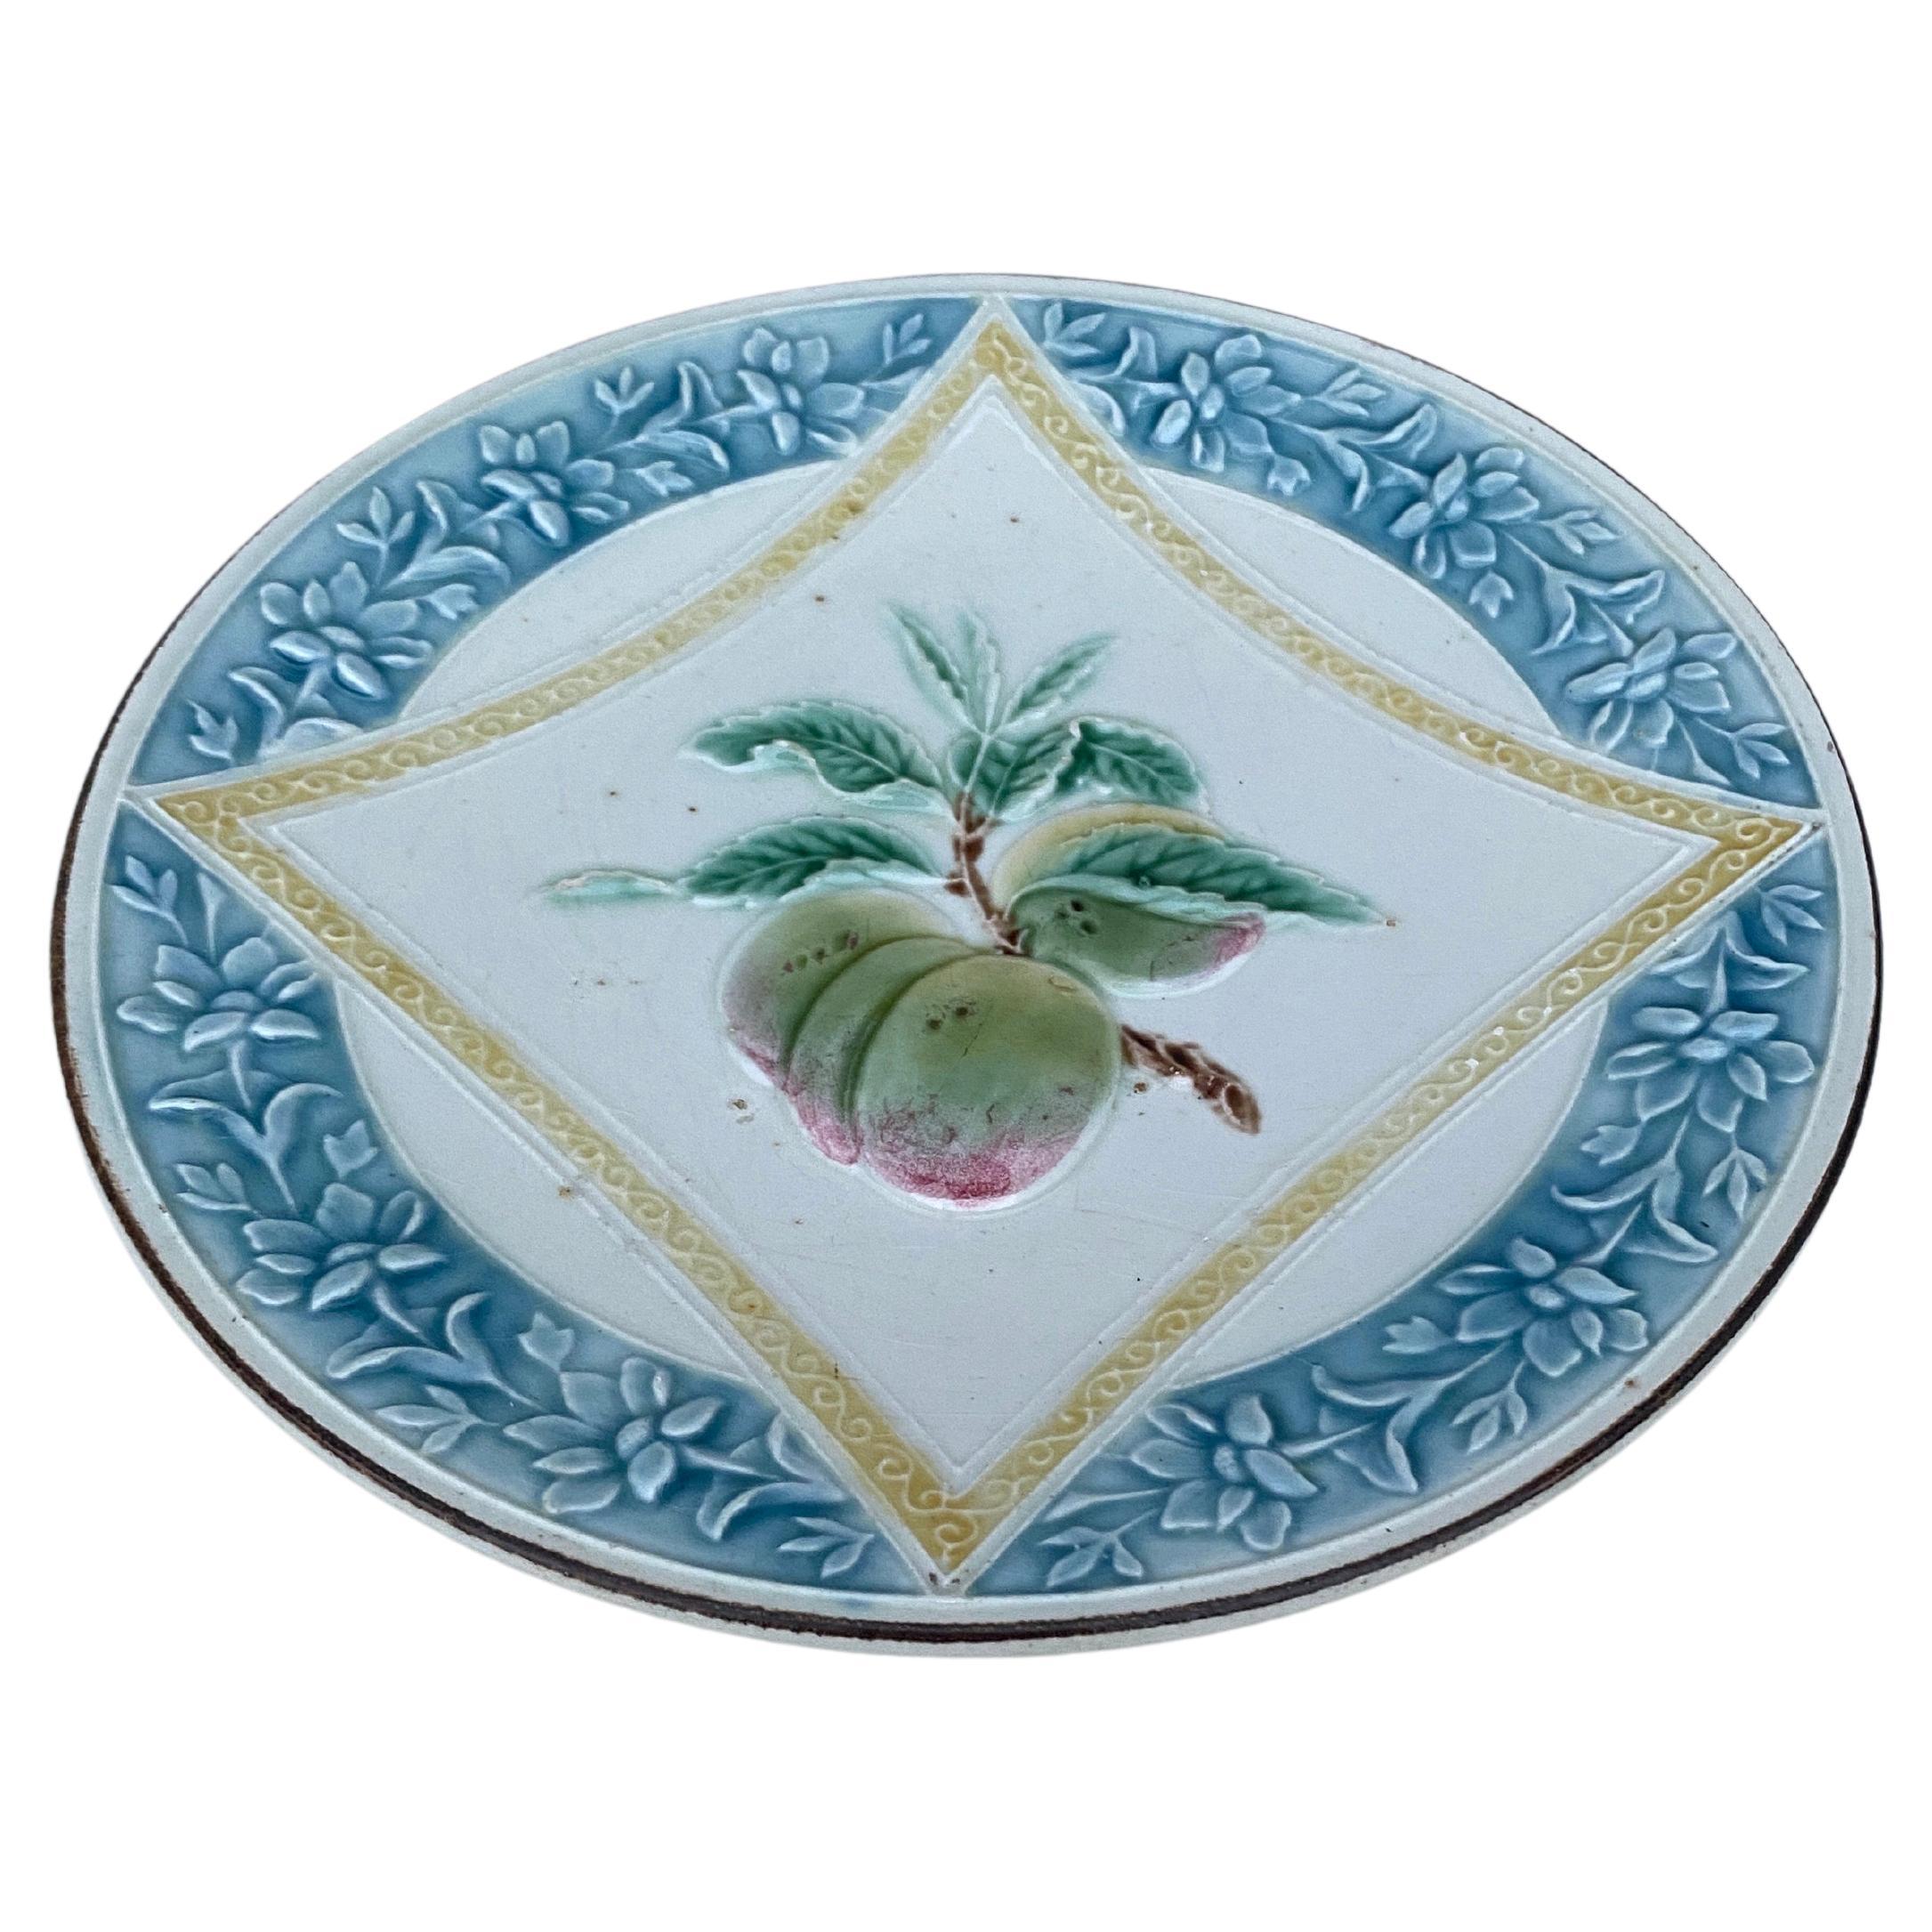 French Majolica Plums Plate circa 1890.